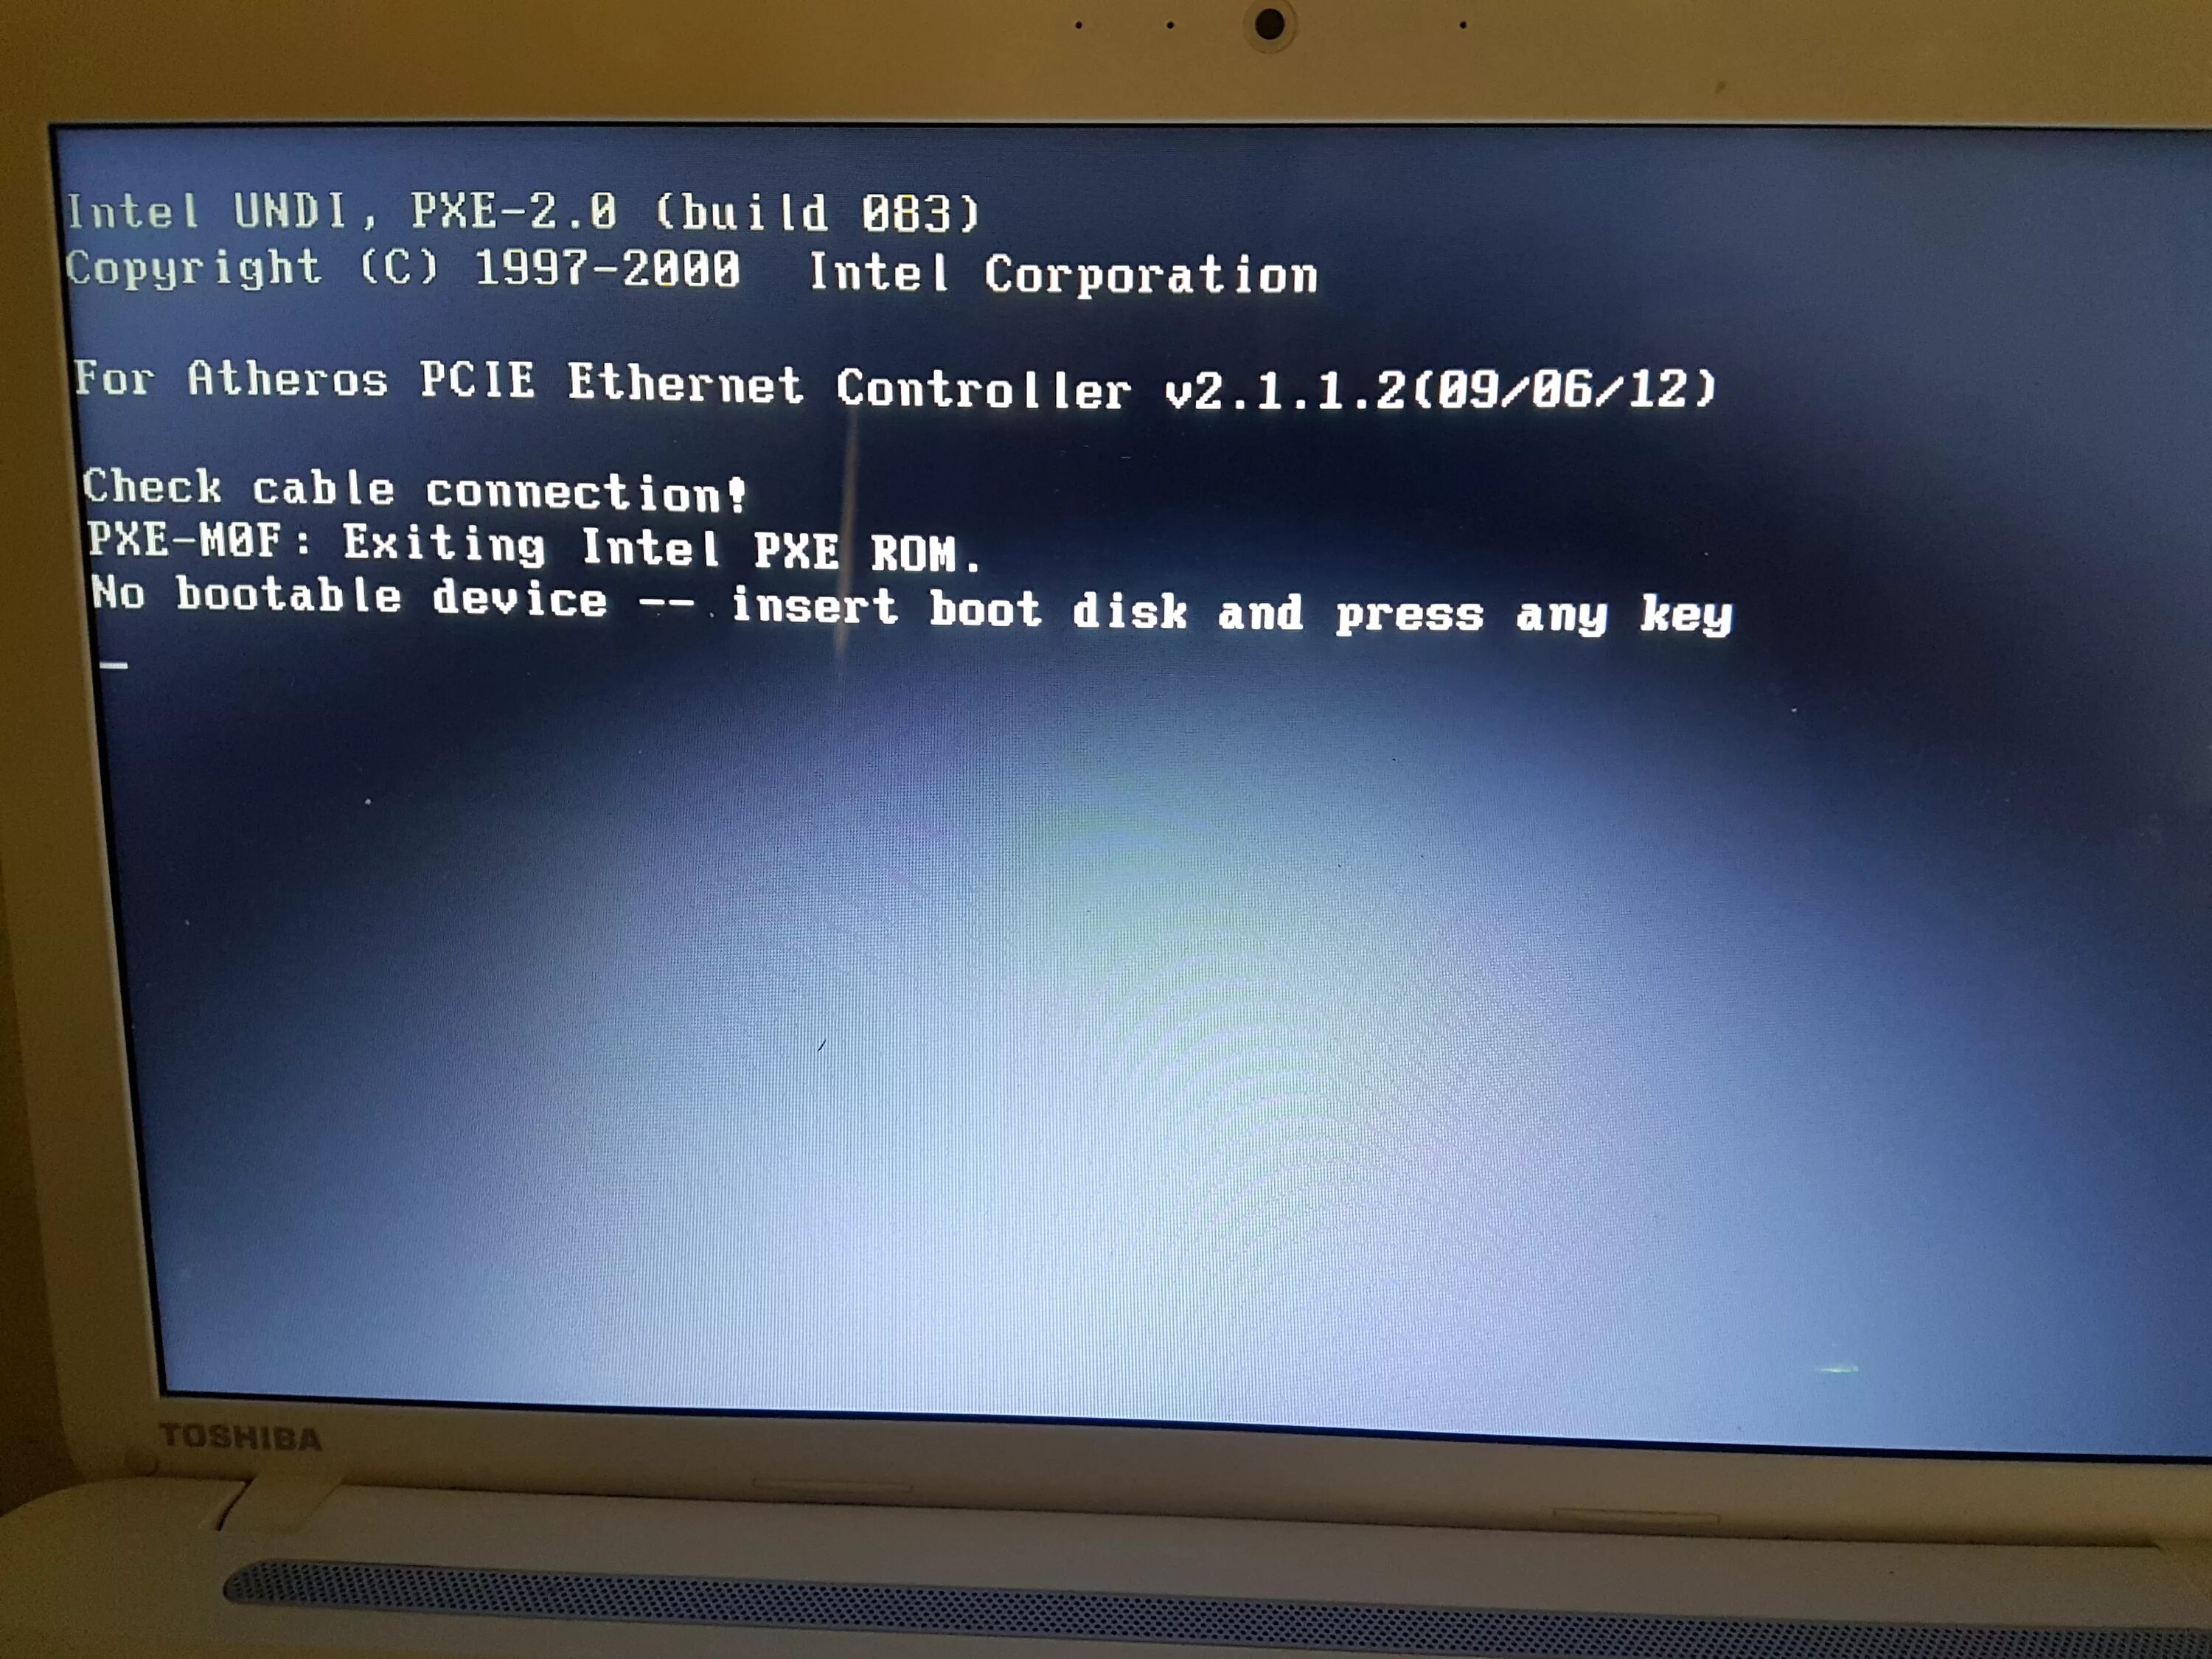 No bootable system. Ошибка no Bootable device на ноутбуке. Ошибка на ноутбуке no Bootable device Insert Boot Disk and Press any Key. PXE MOF exiting PXE ROM на ноутбуке Lenovo. PXE-MOF exiting PXE ROM на ноутбуке.